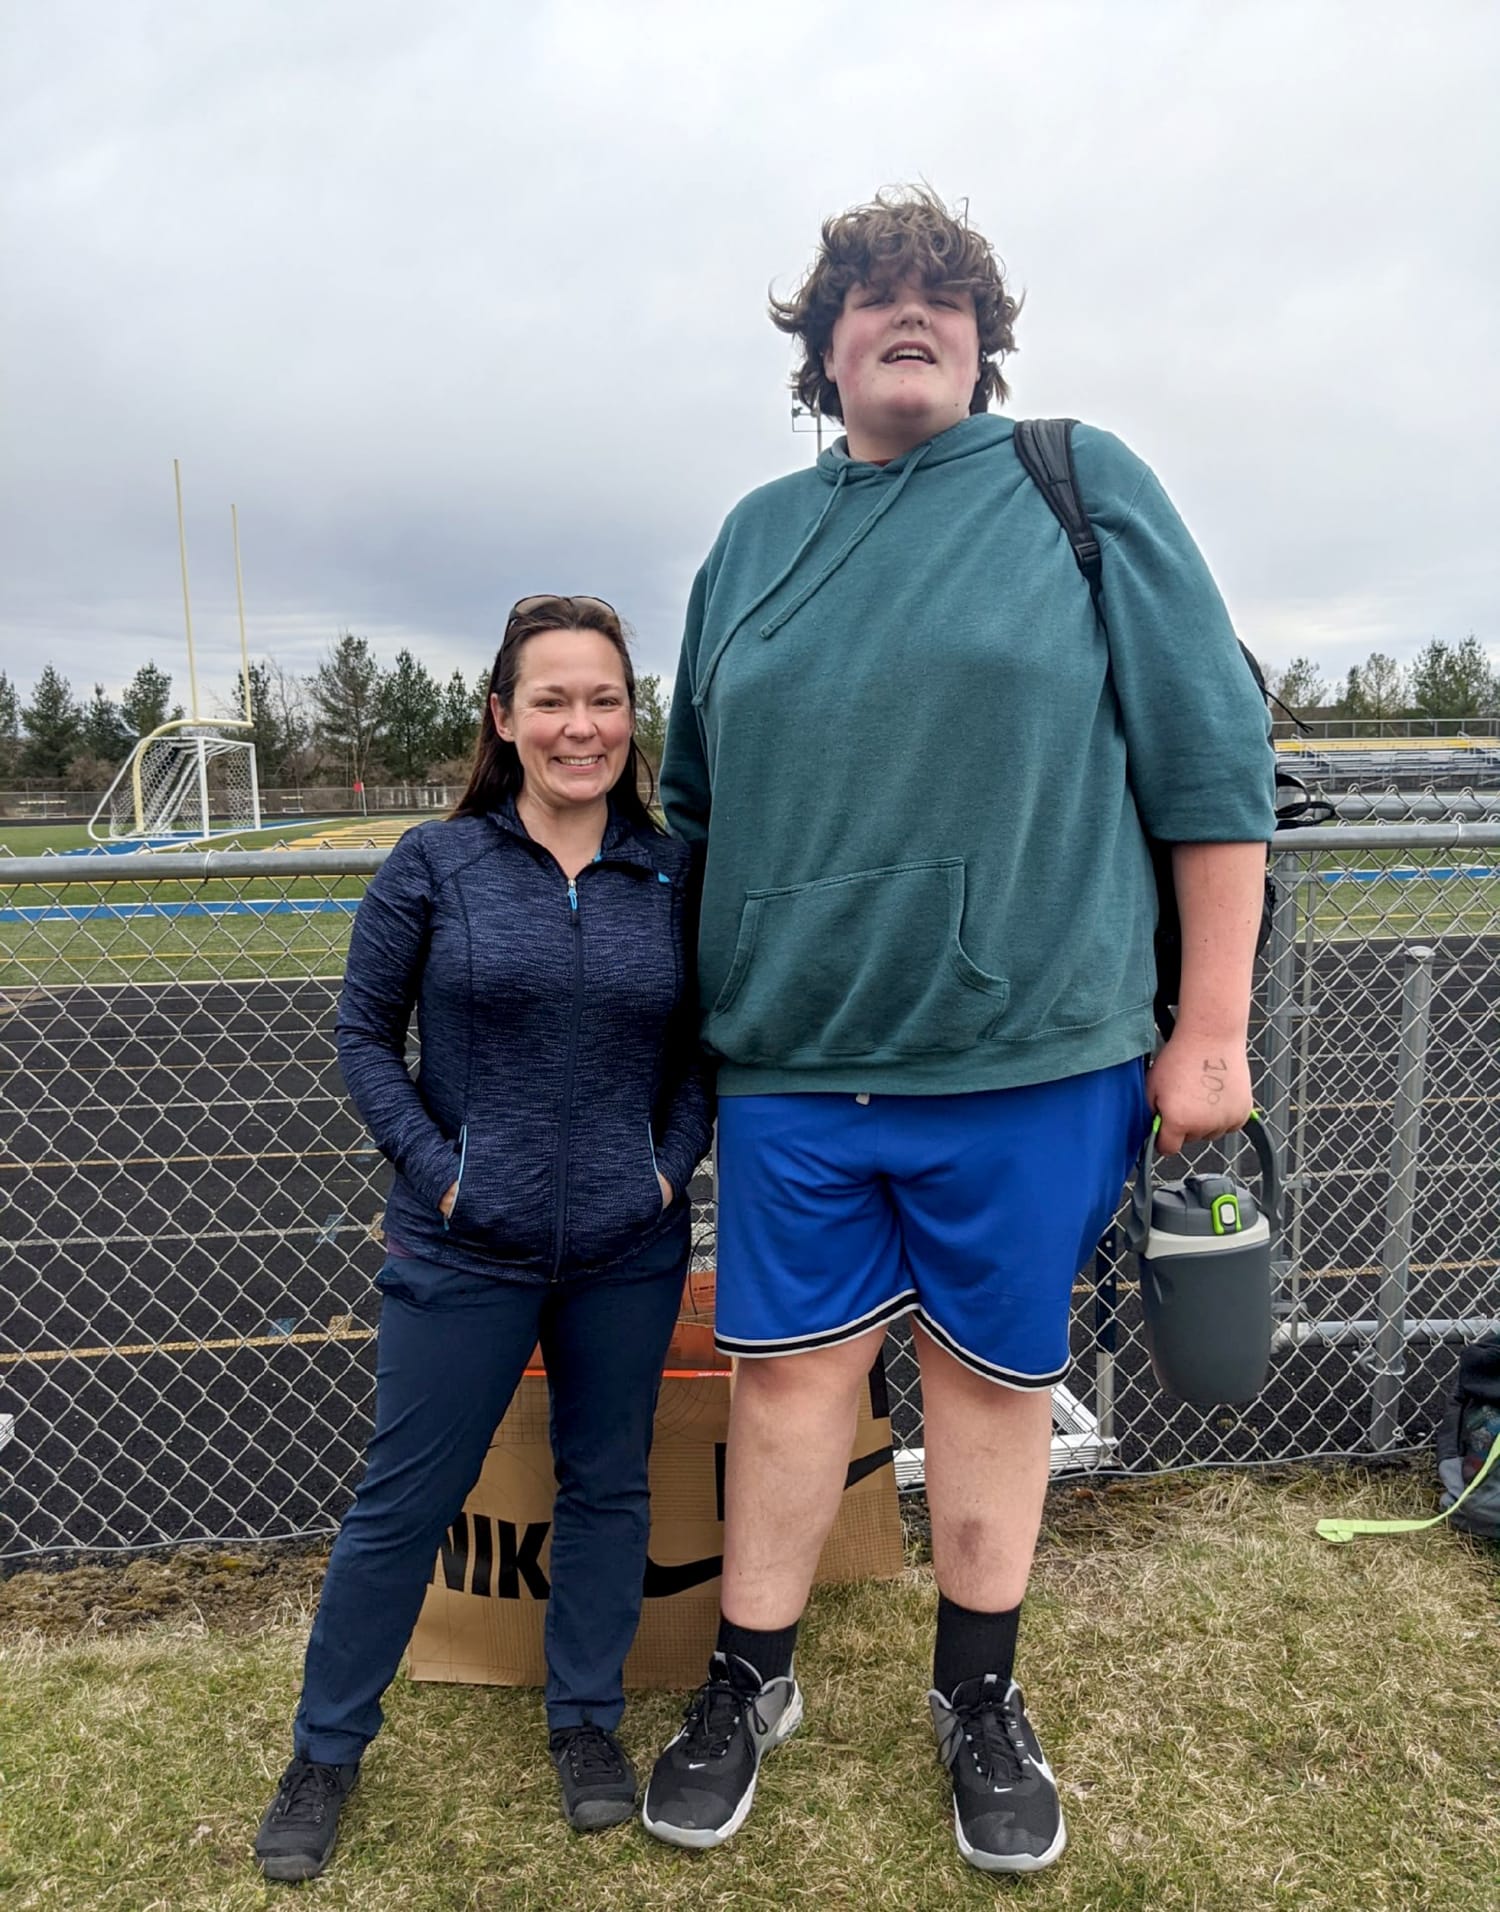 Michigan mom hunts worldwide for size 23 shoes for 14-year-old son